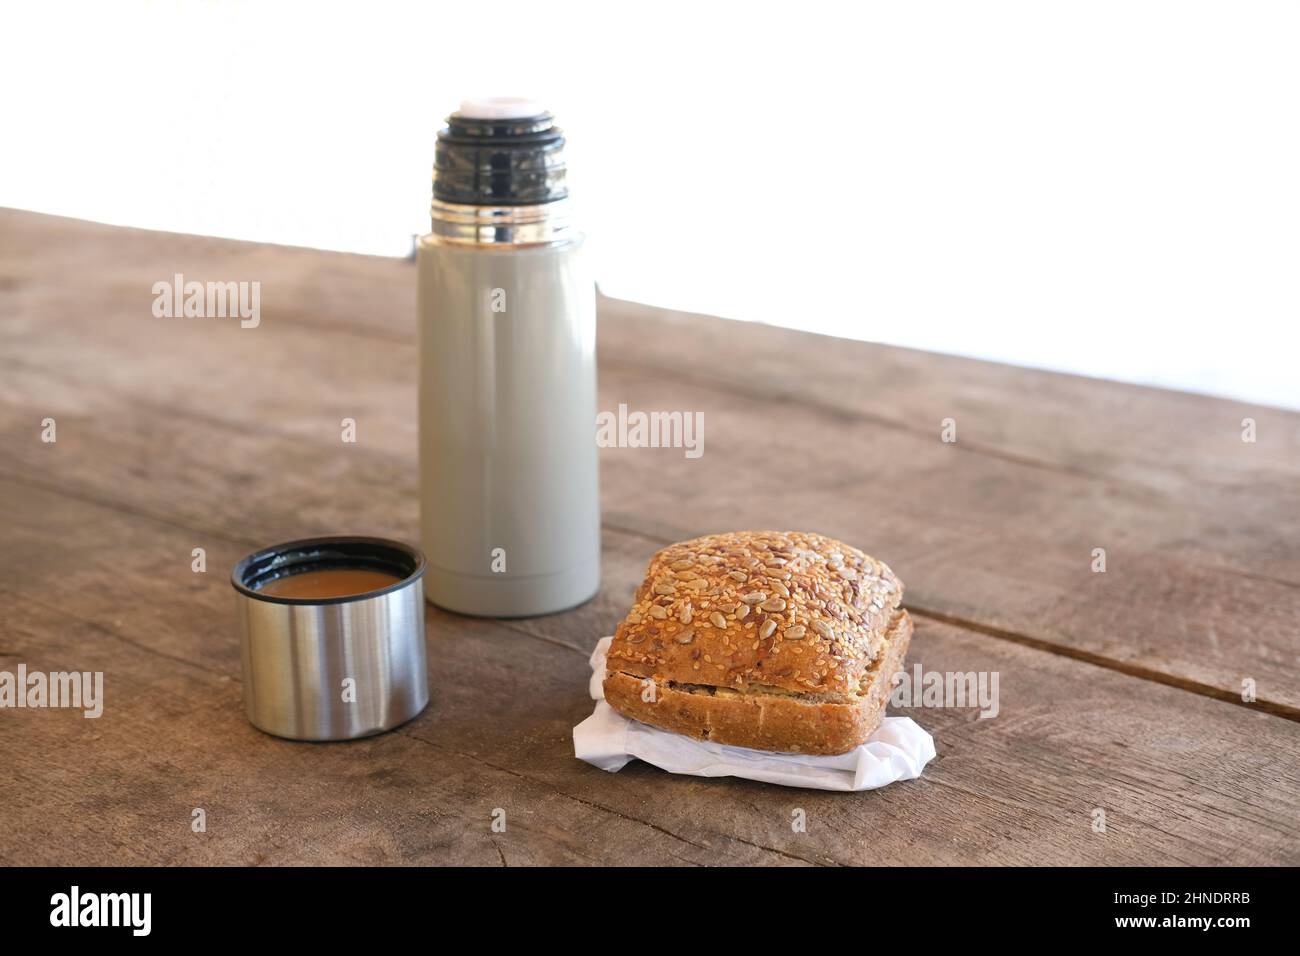 https://c8.alamy.com/comp/2HNDRRB/outdoor-lunch-when-hiking-in-forest-hot-white-coffee-in-thermos-flask-and-homemade-sandwich-on-wooden-table-2HNDRRB.jpg